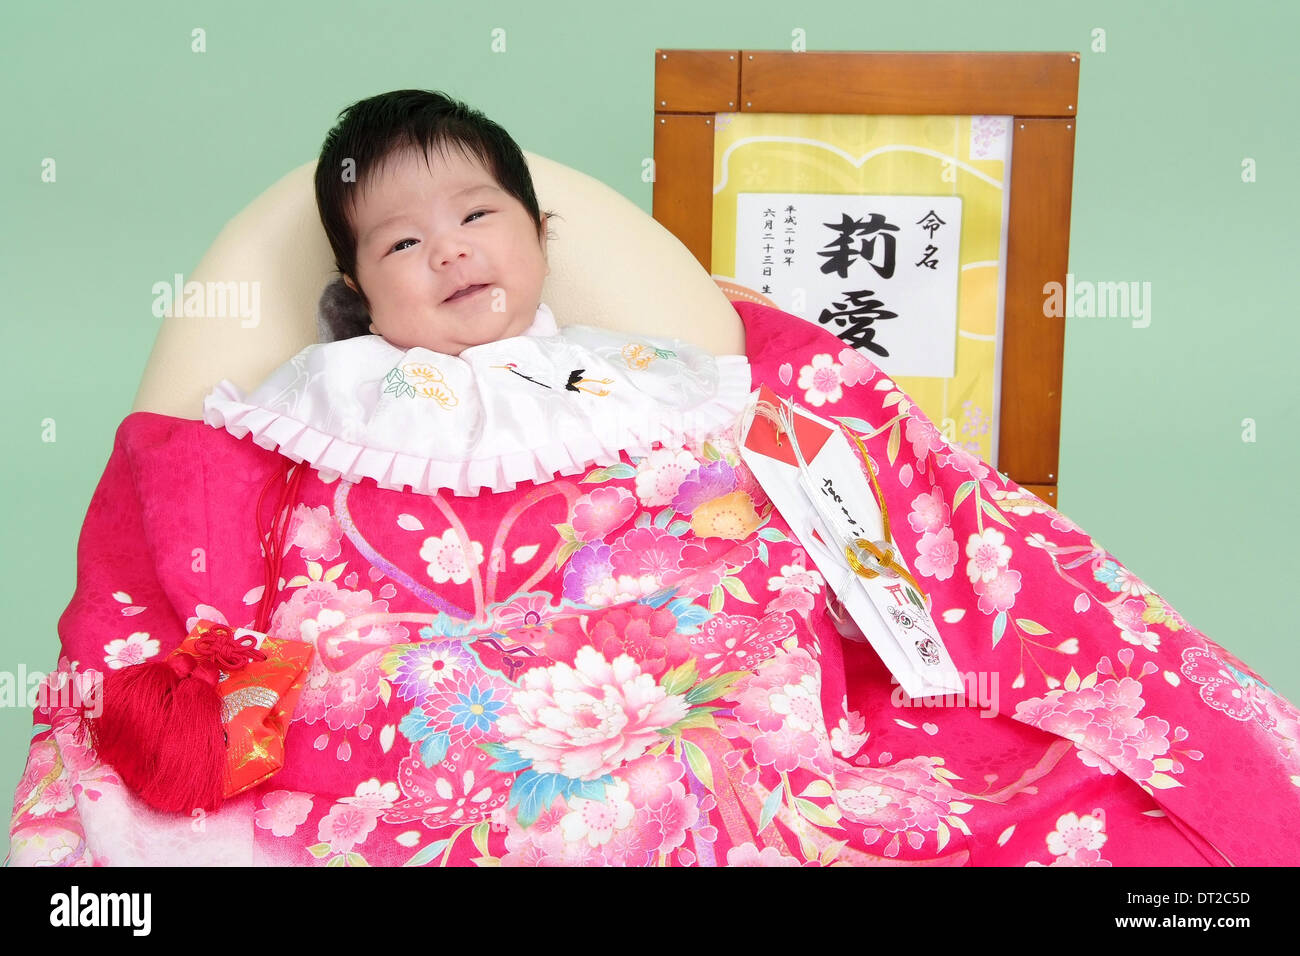 Miyamairi Picture of a Baby Girl with Name written on Kanji in a Frame Stock Photo